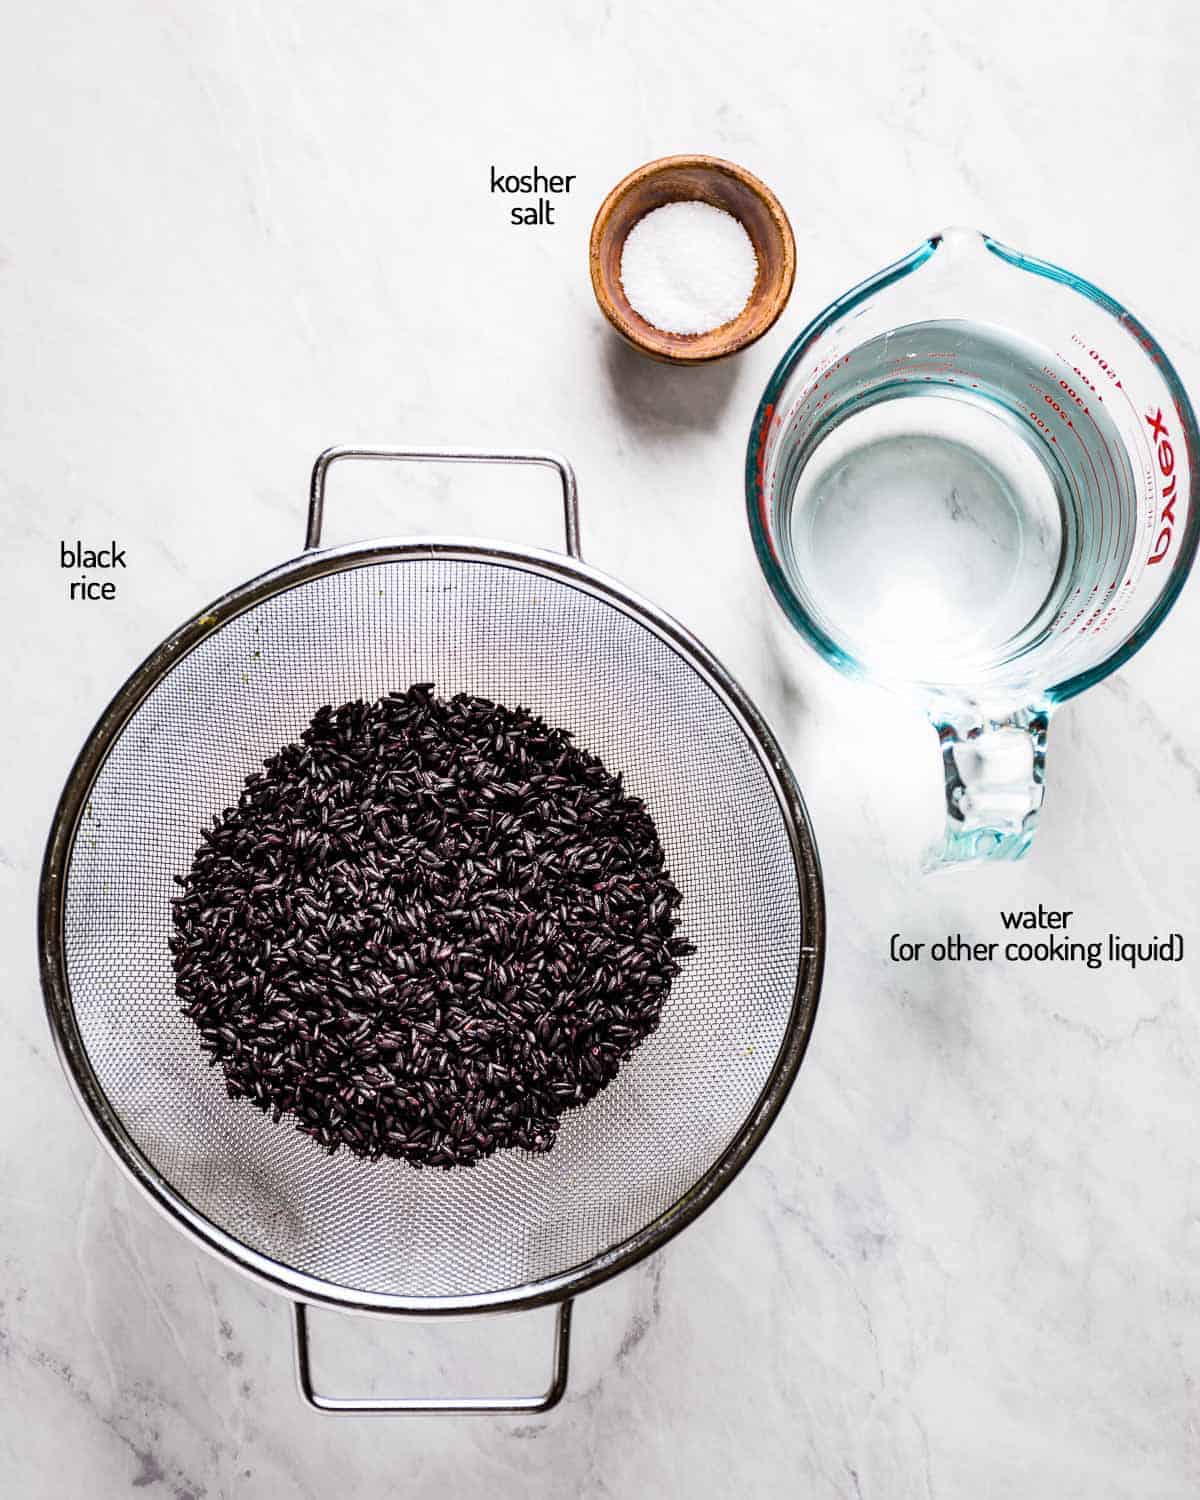 Ingredients for cooking black rice laid out on a white backdrop